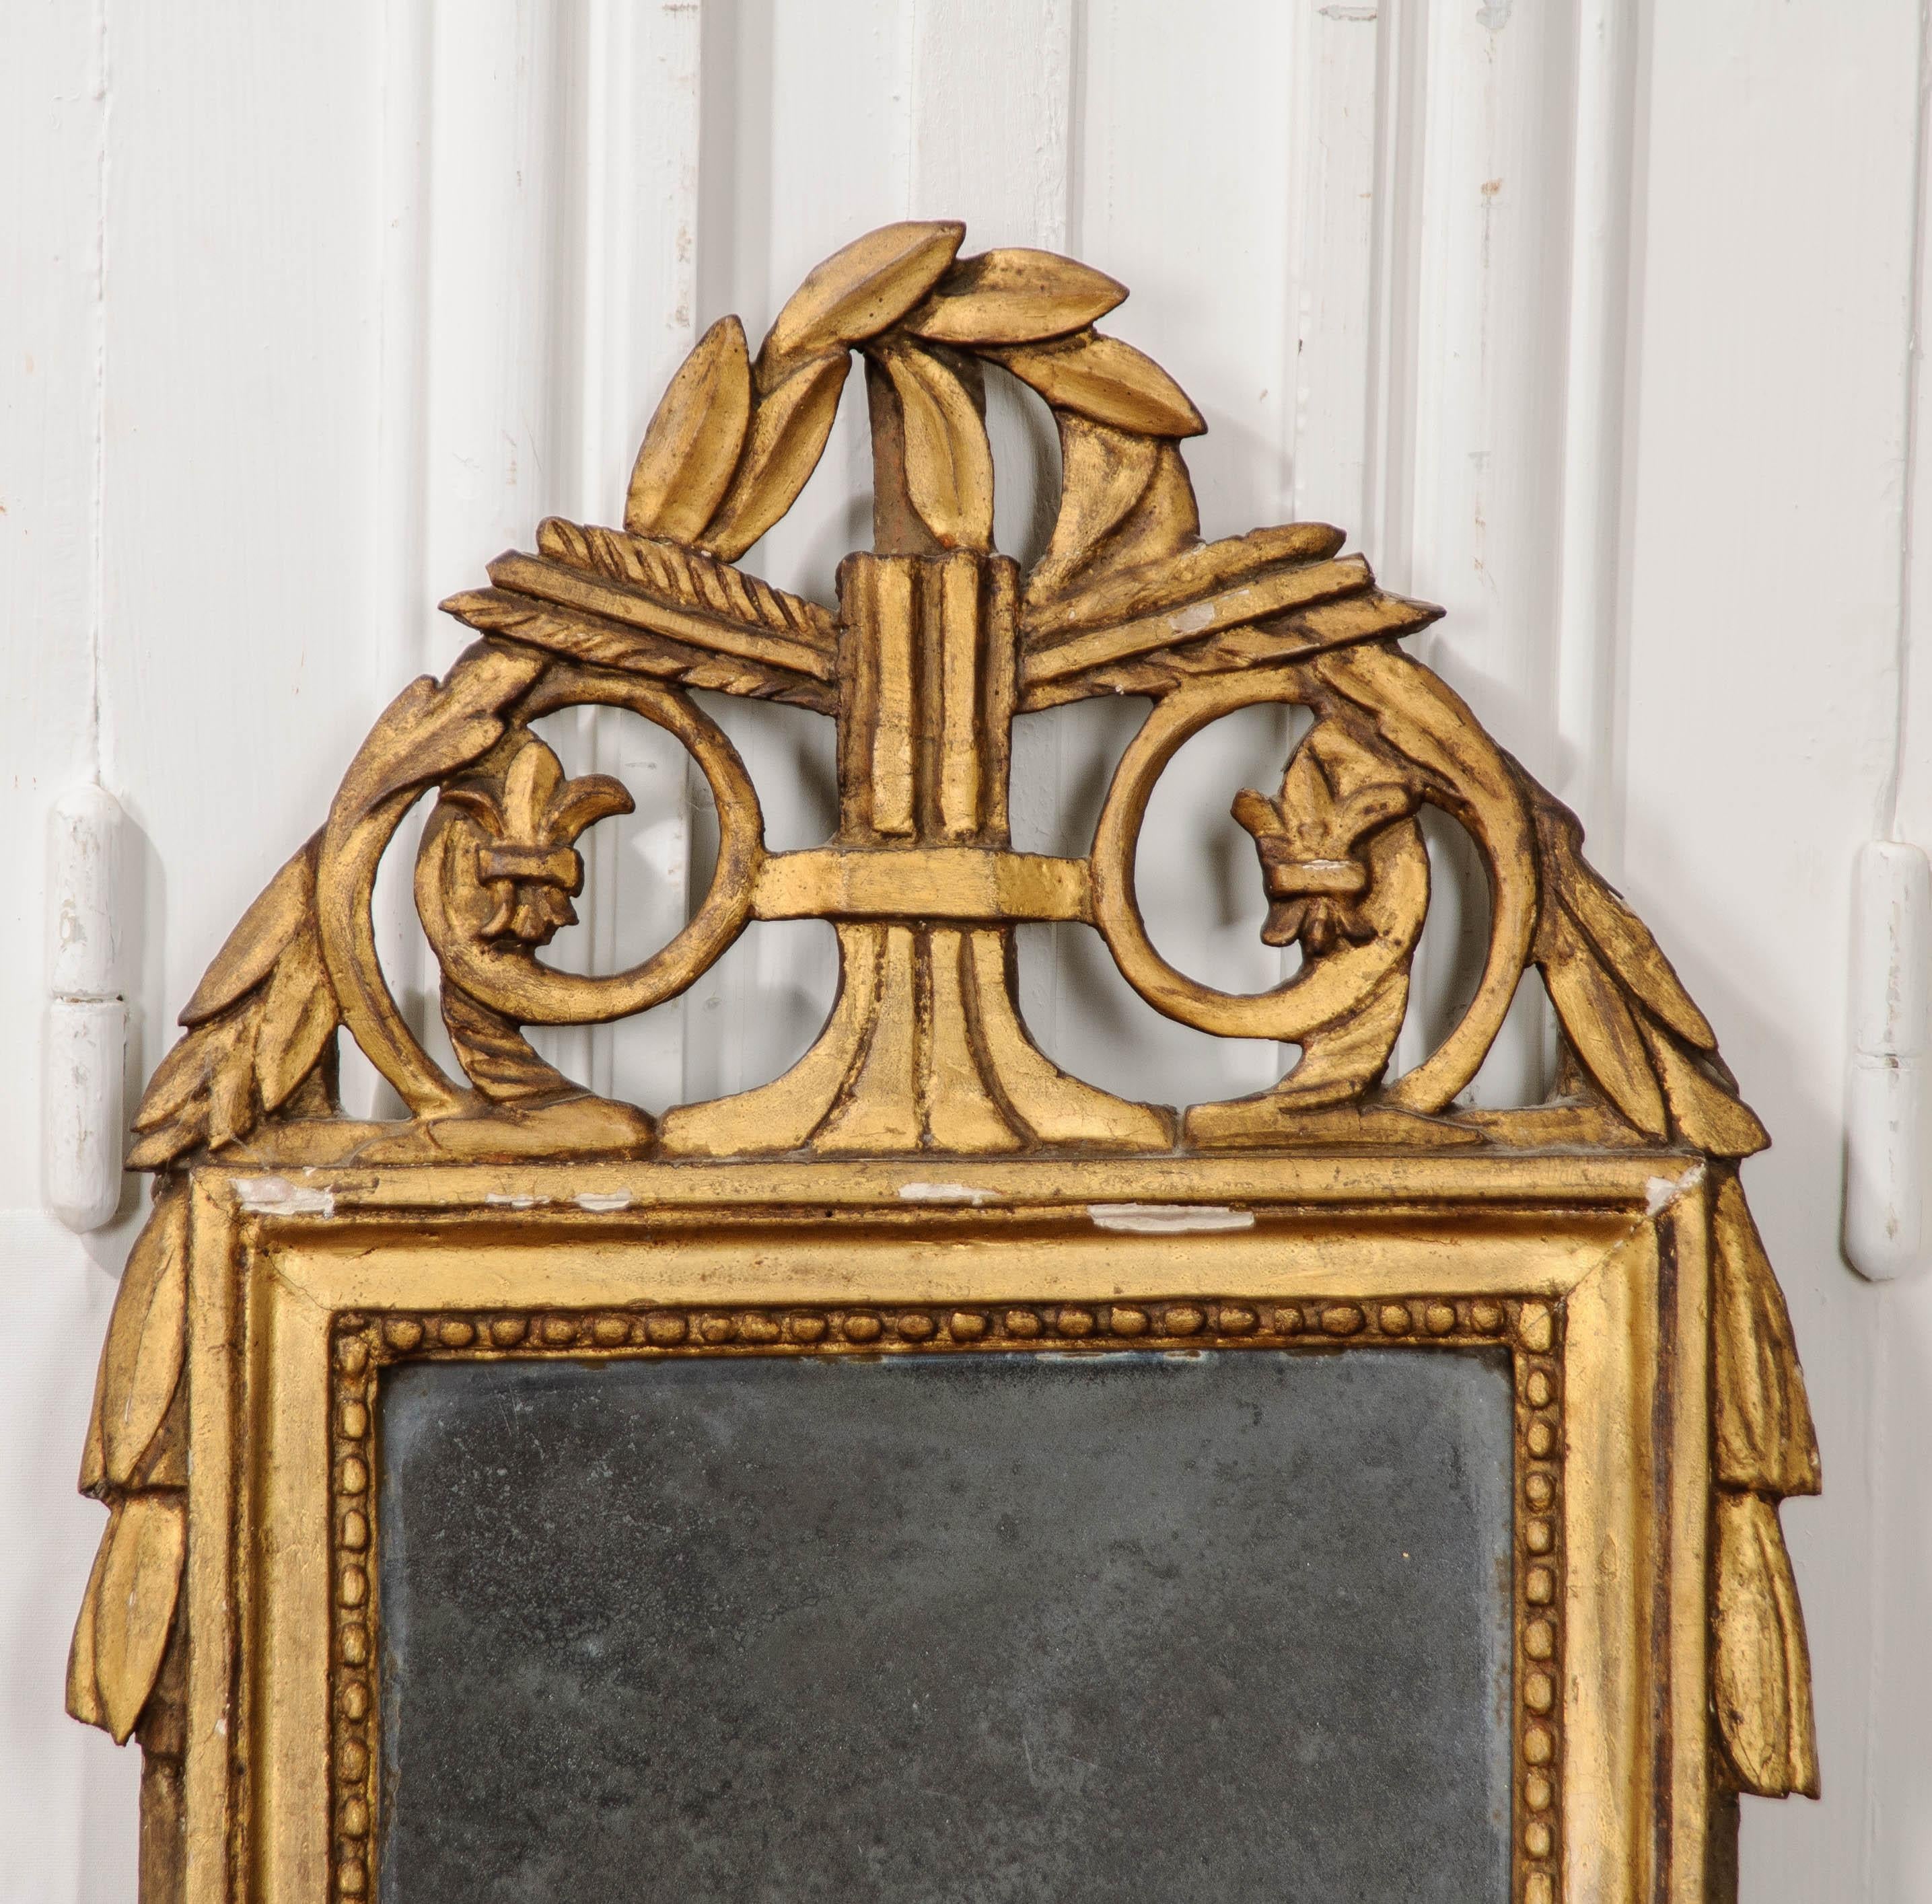 A darling carved giltwood mirror, made in the Louis XVI style, 19th century France. The petite mirror has a wonderful crest that features gilt fleur de lis’s, scrolled filigree, acanthus leaves and arrow fletchings. The original glass has lost the